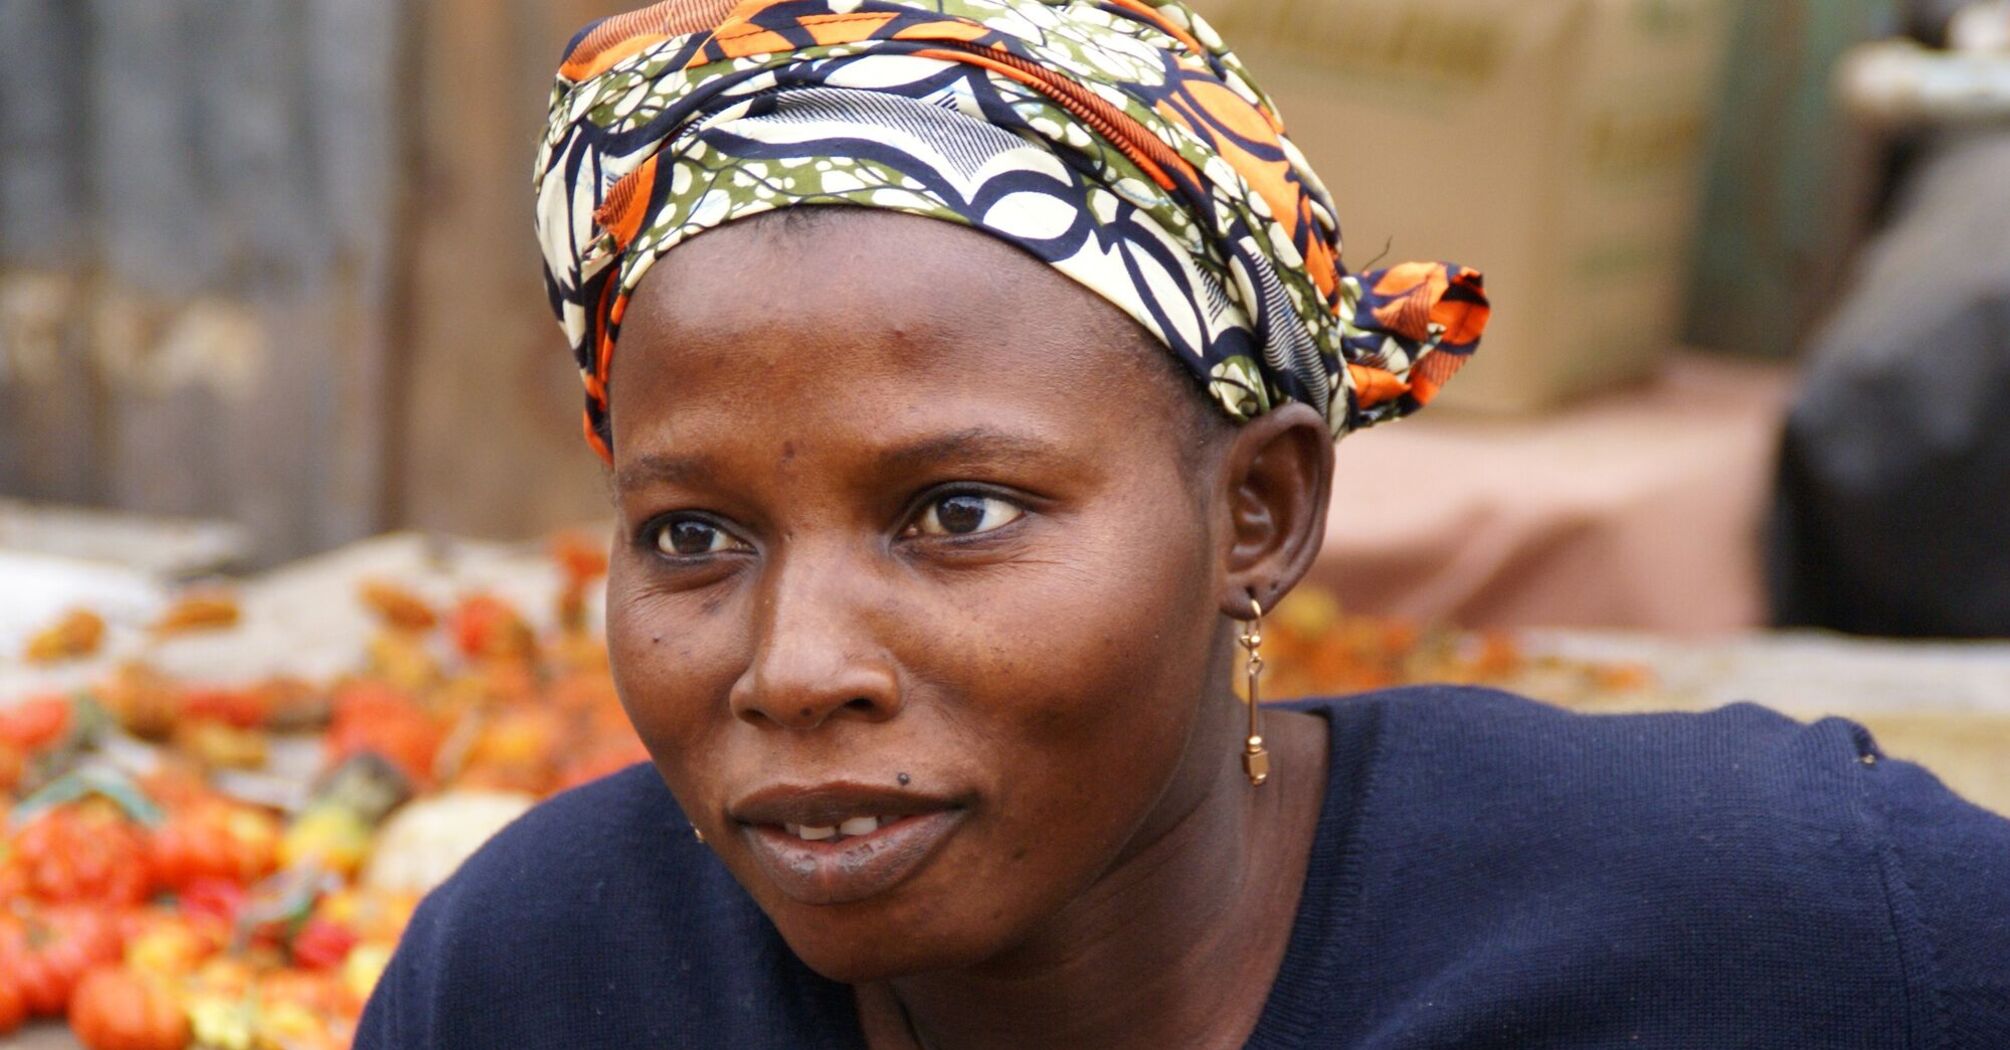 A Gambian woman at a market, wearing a headscarf and a navy blue top